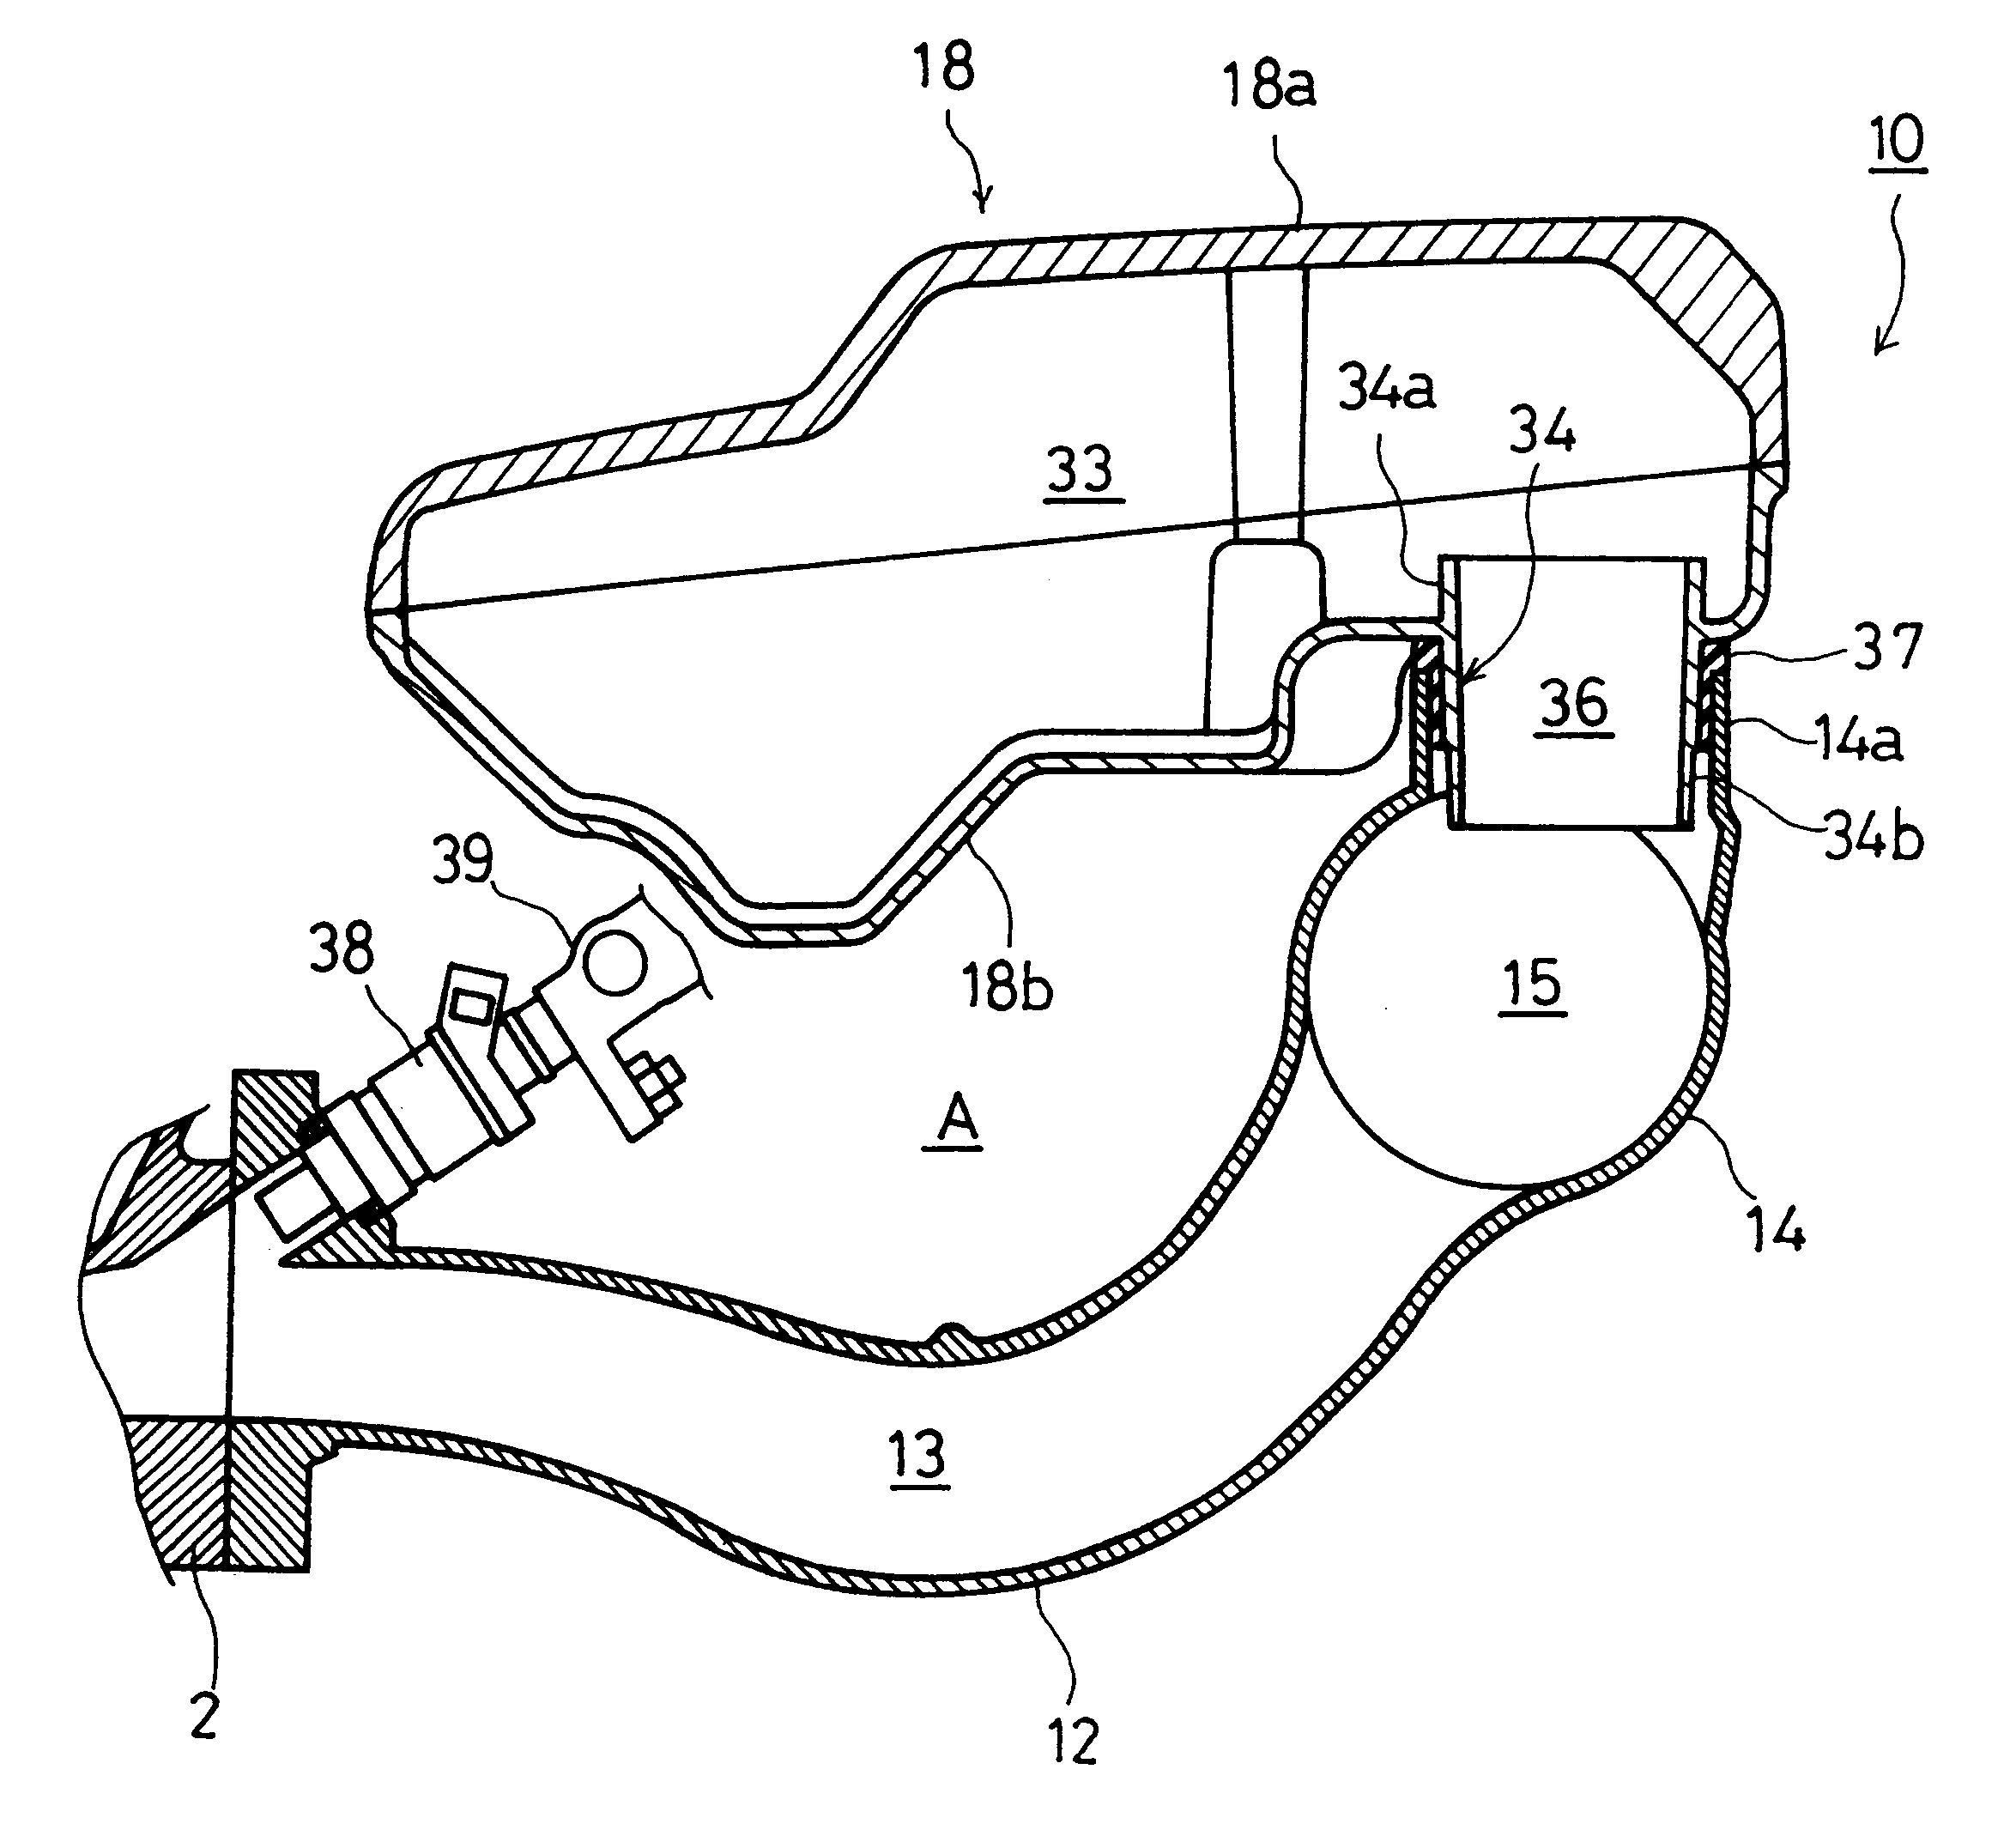 Suction apparatus of multi-cylinder internal combustion engine